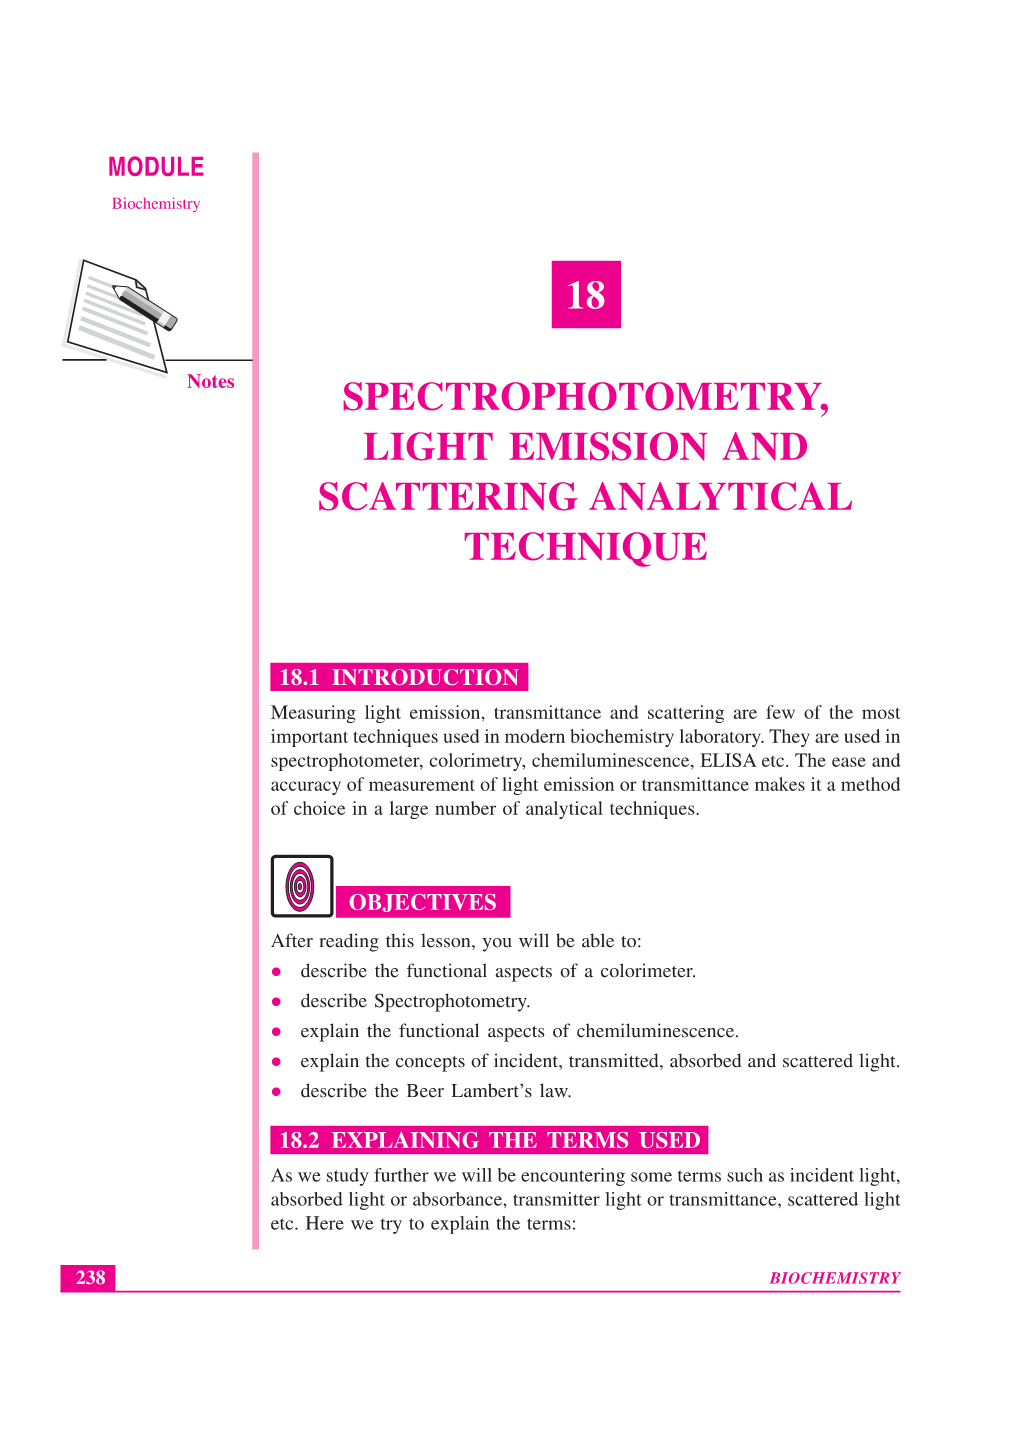 18 Spectrophotometry, Light Emission and Scattering